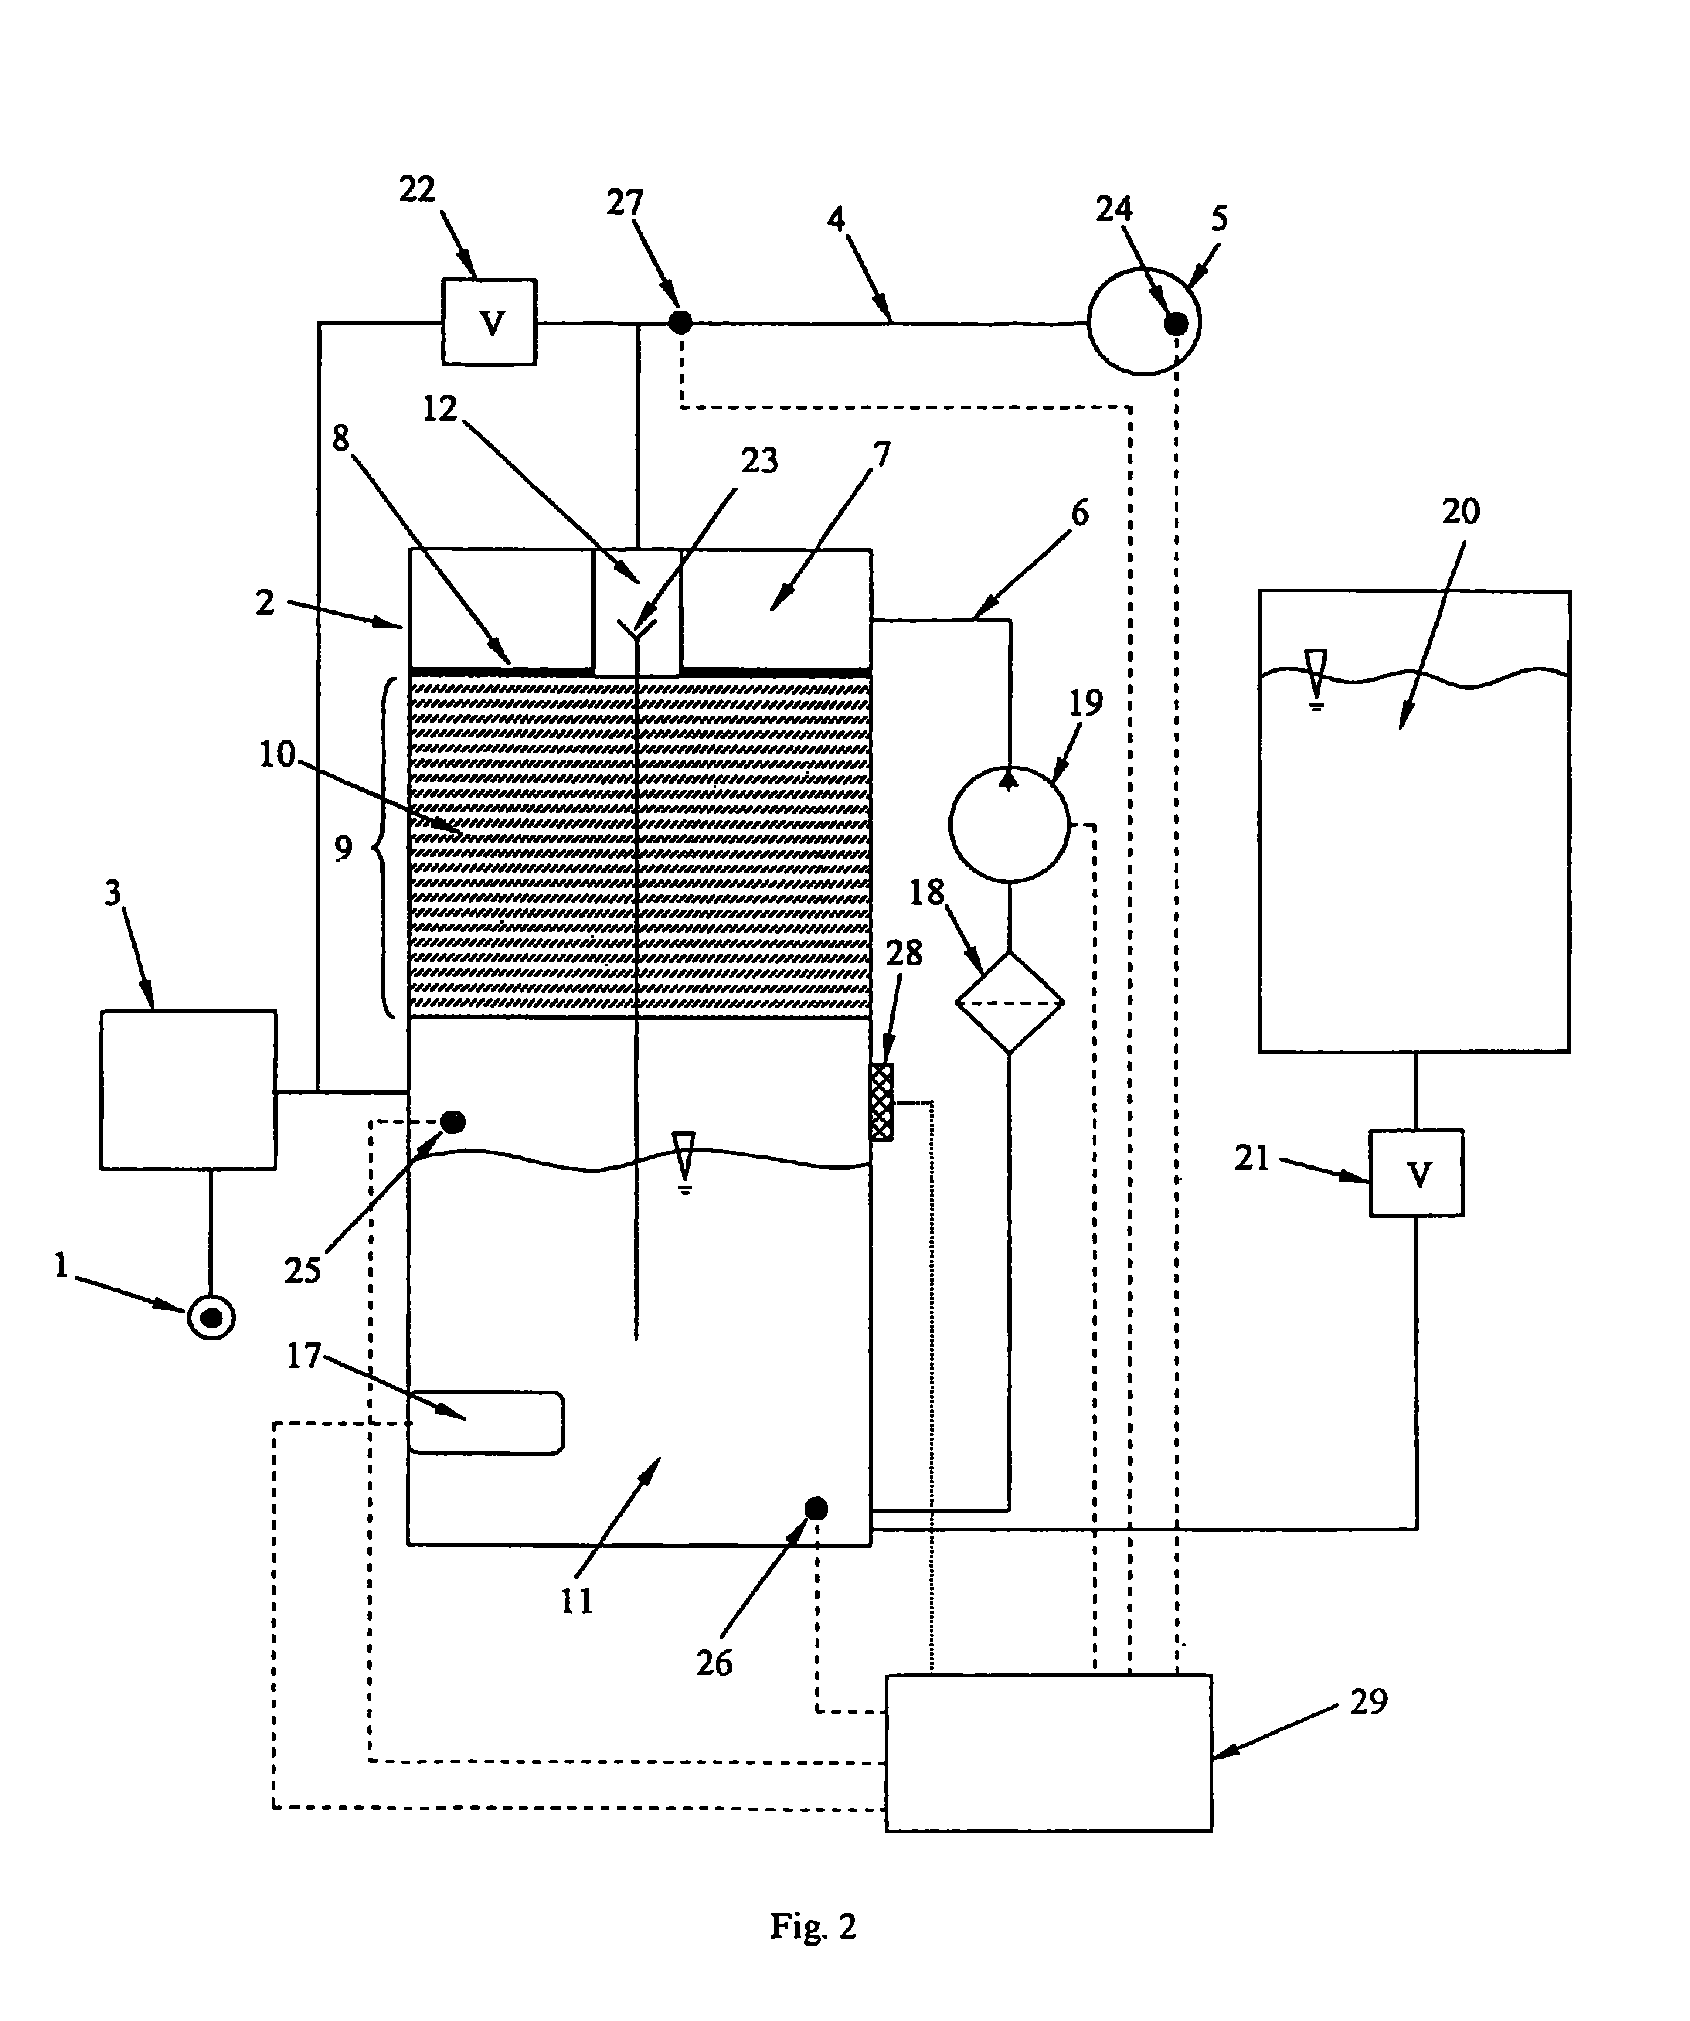 Device and method for tempering and humidifying gas, especially respiratory air